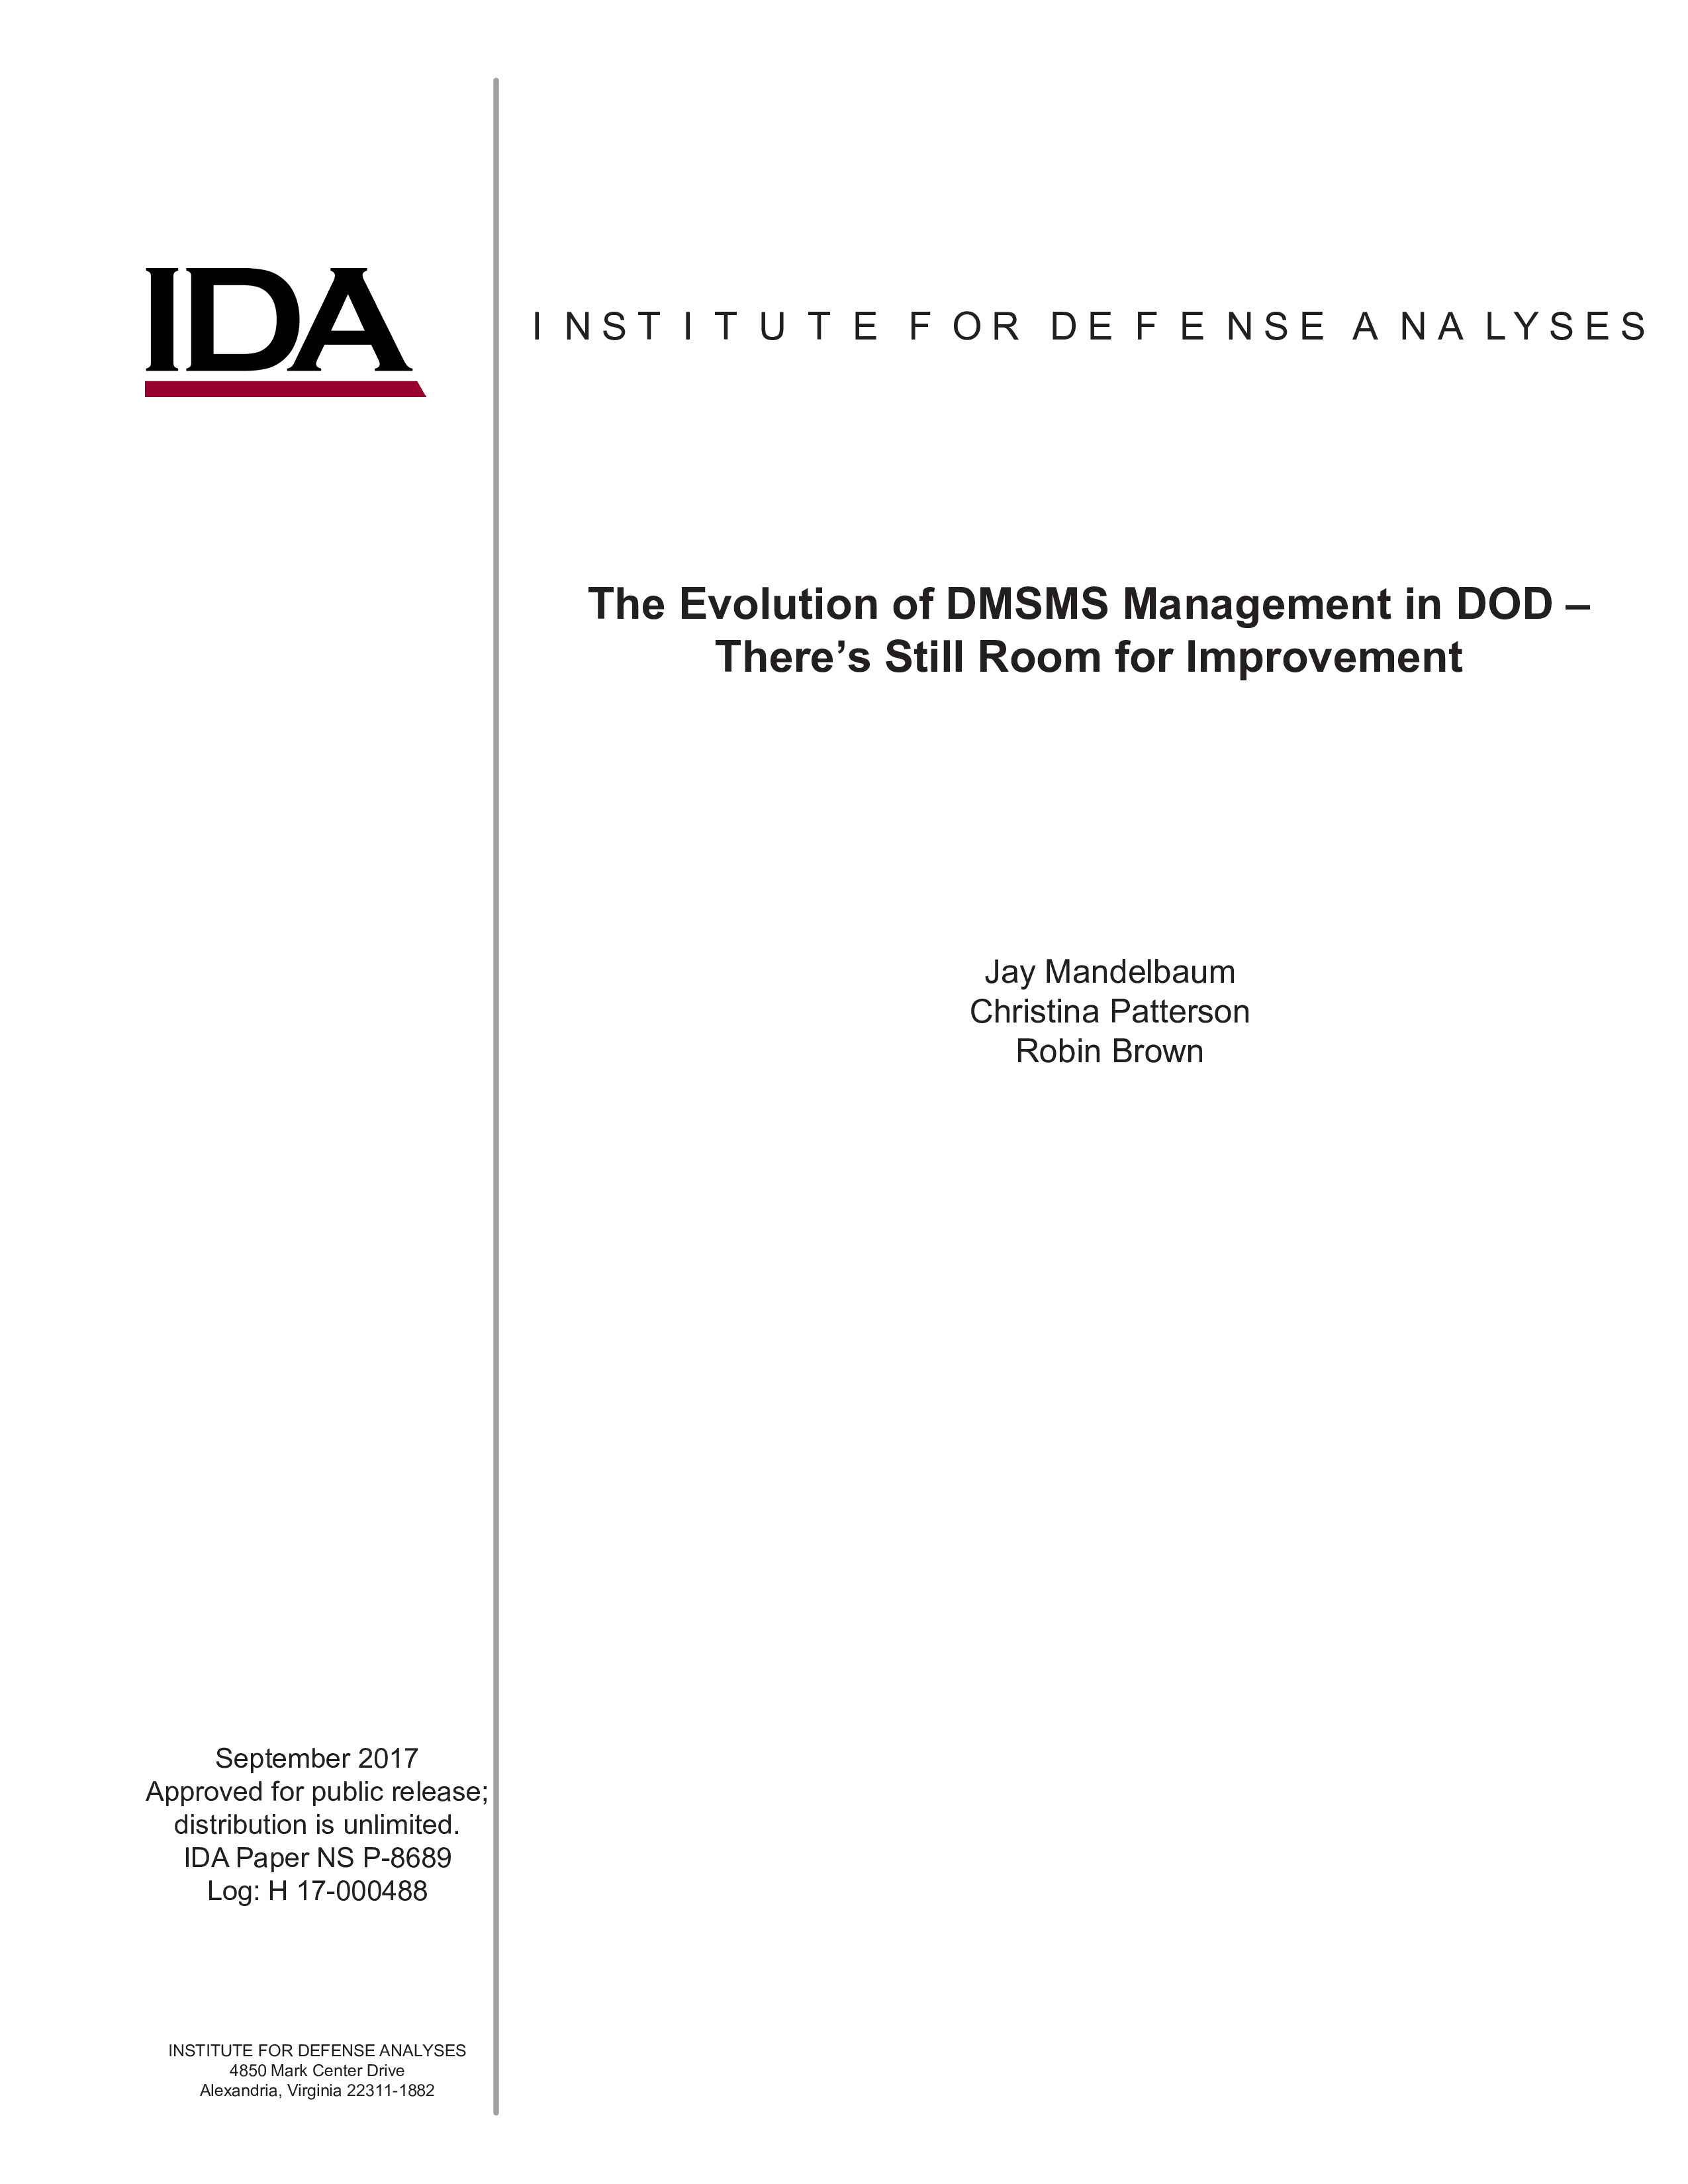 The Evolution of DMSMS Management in DOD – There’s Still Room for Improvement